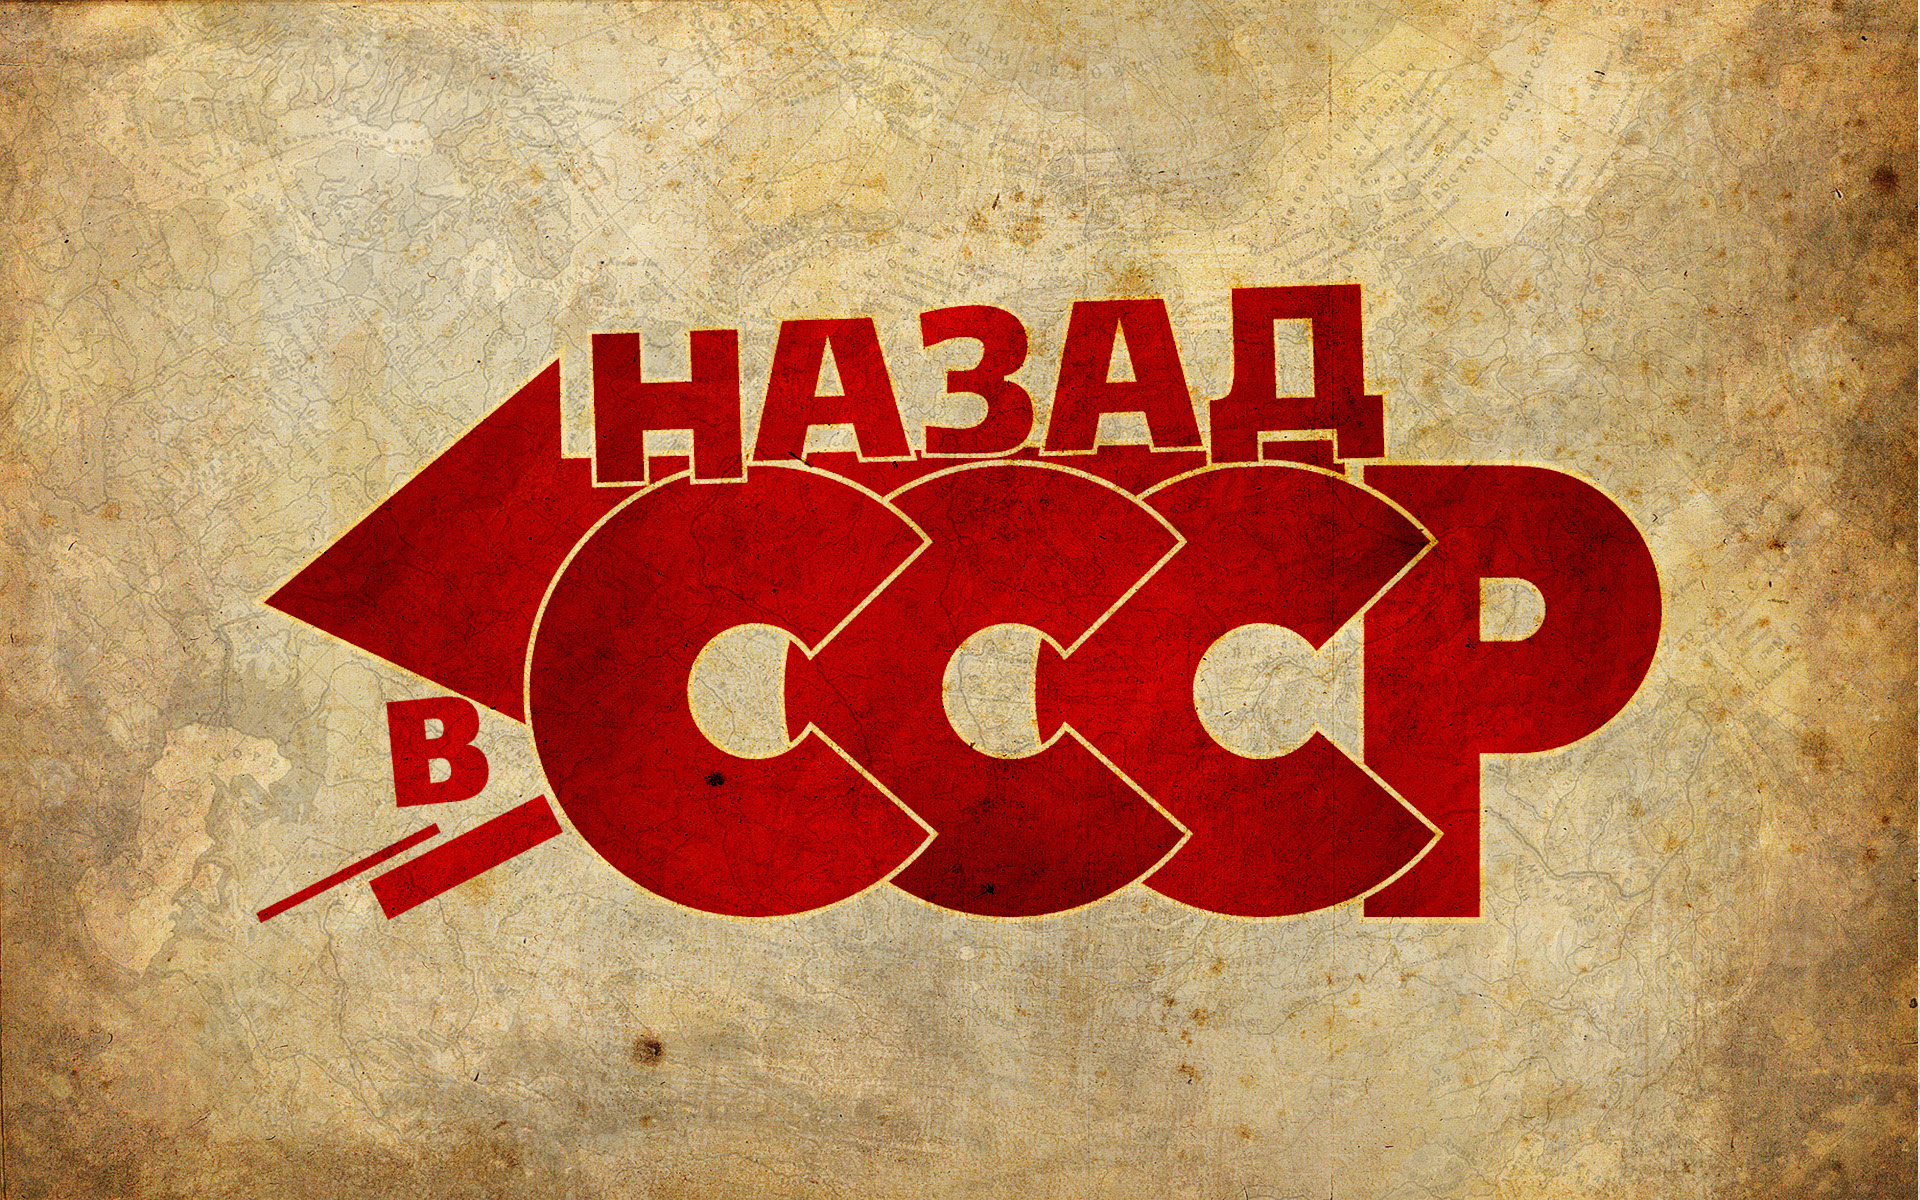 Back In The Ussr Wallpaper